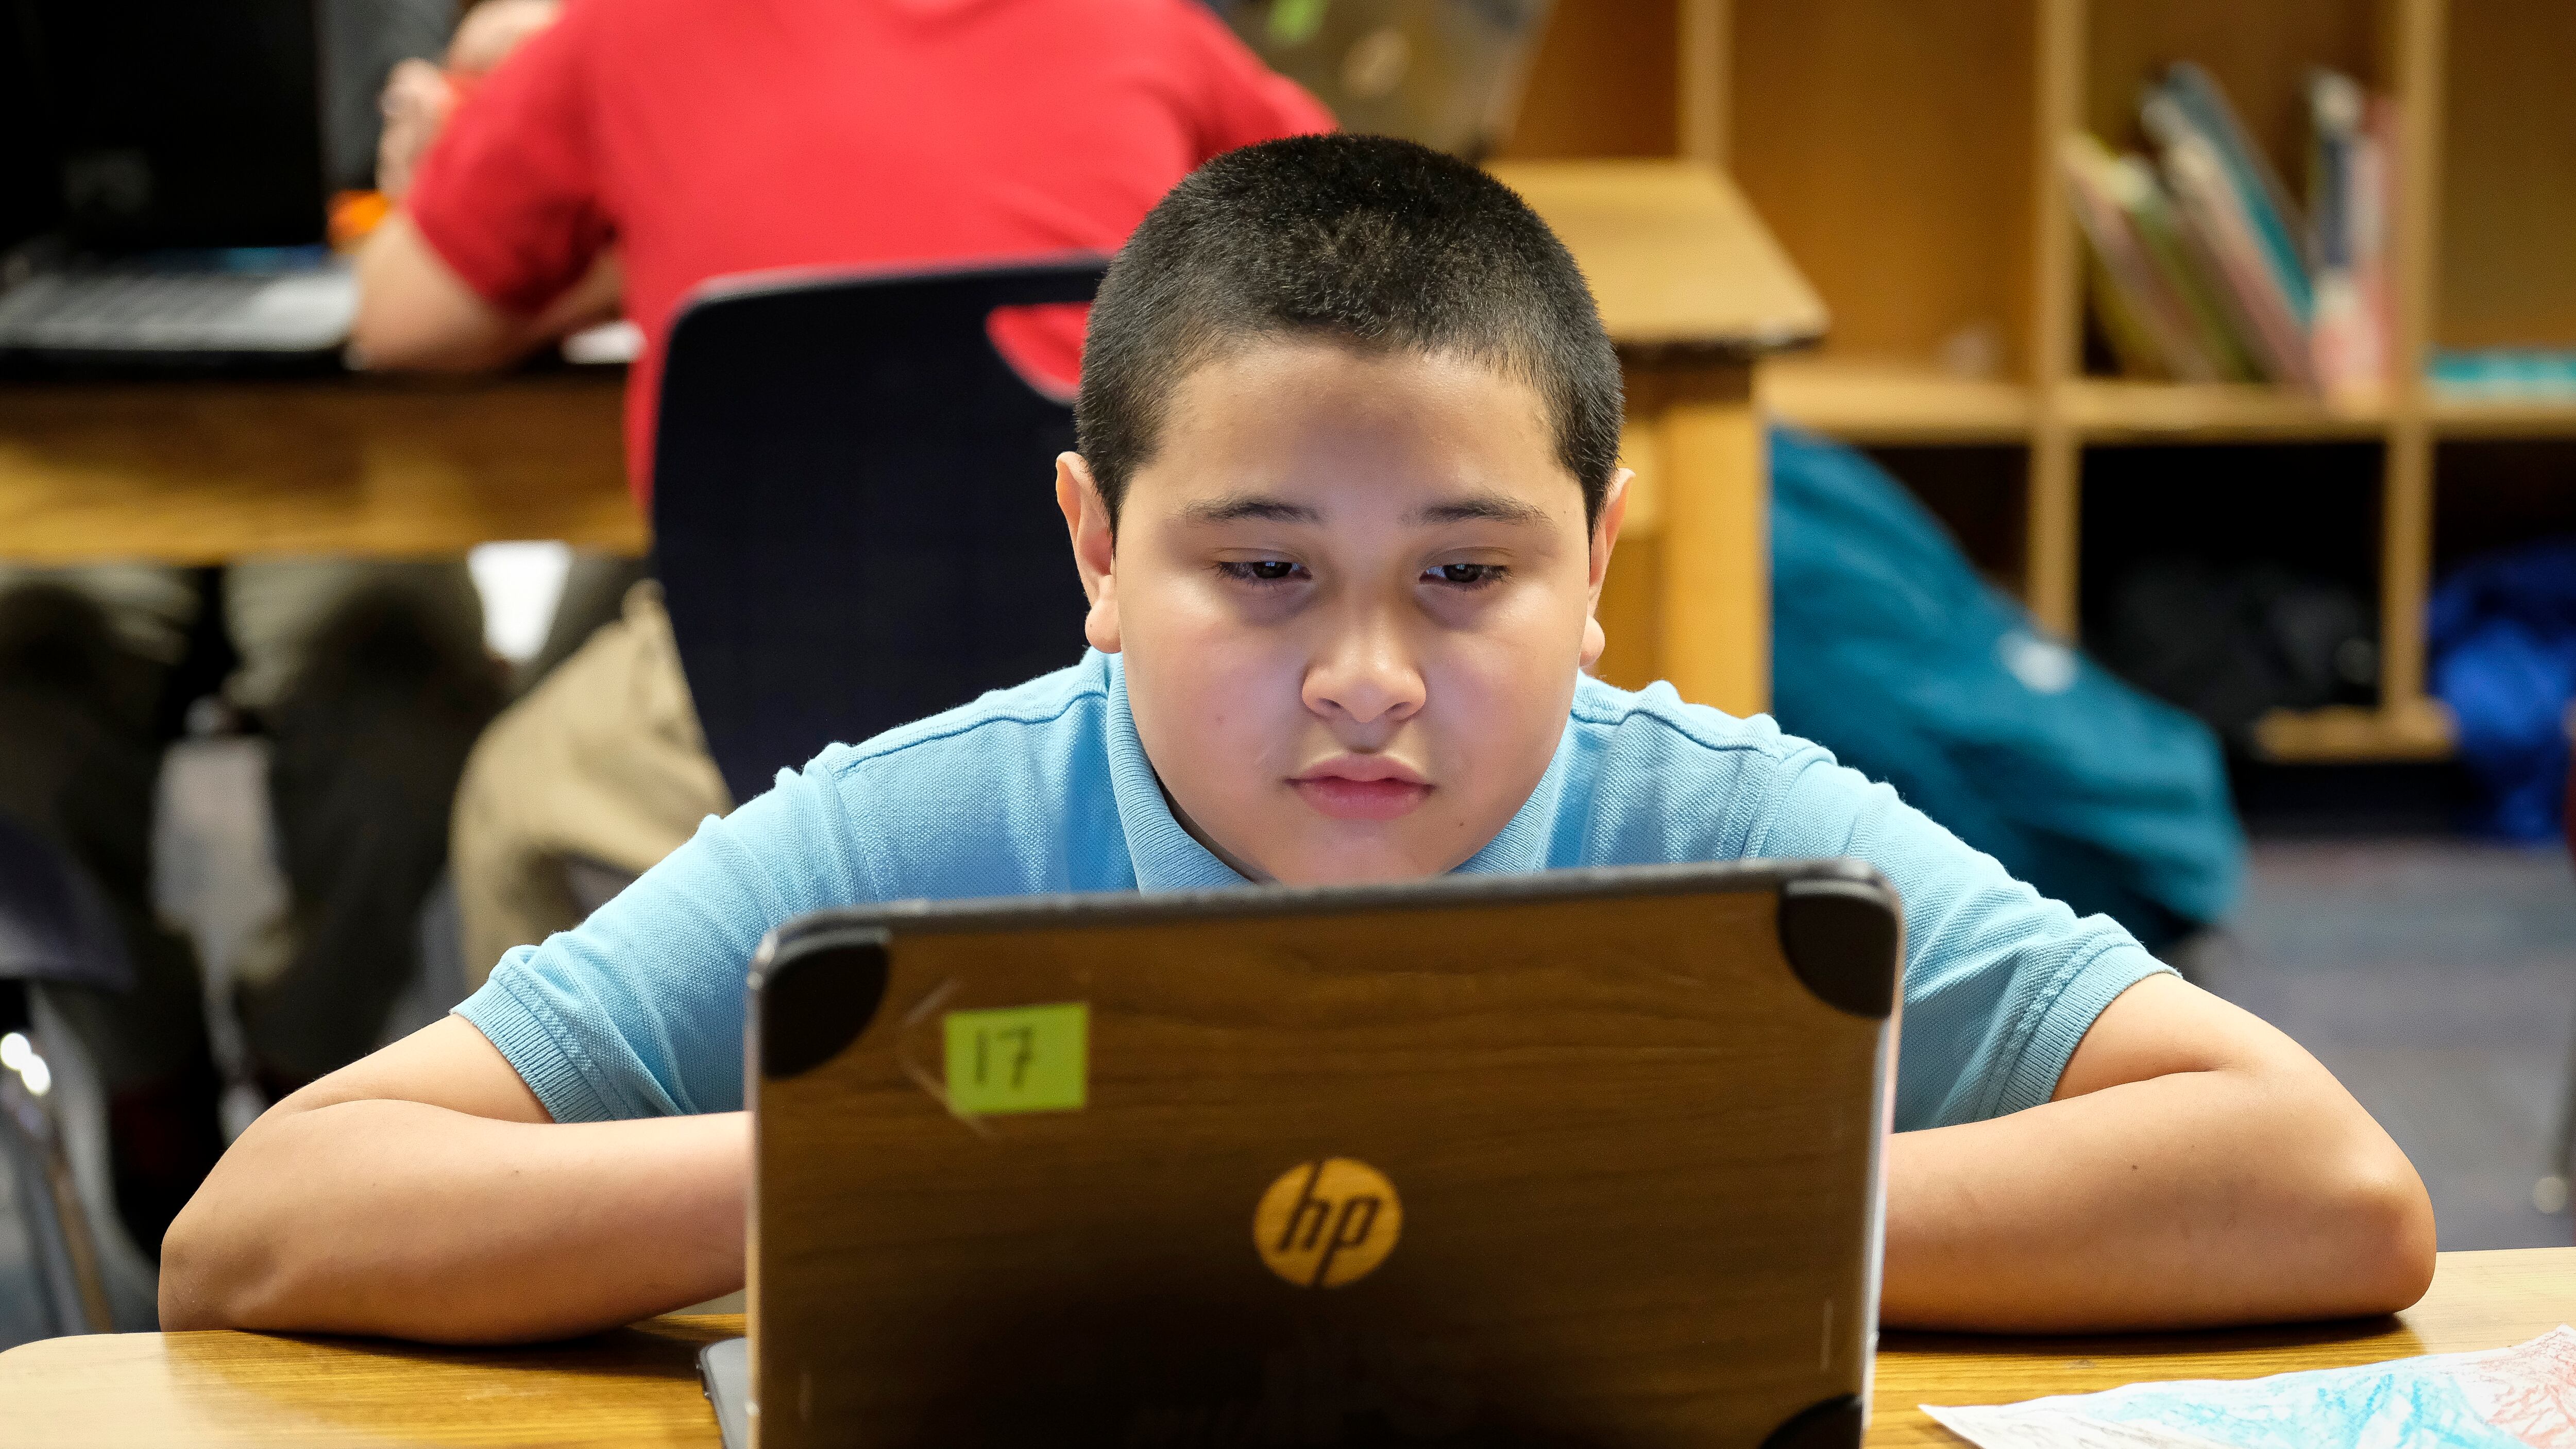 A student works on a laptop computer in class at Thomas Gregg Neighborhood School, an elementary school in Indianapolis, Indiana. —April, 2019— Photo by Alan Petersime/Chalkbeat